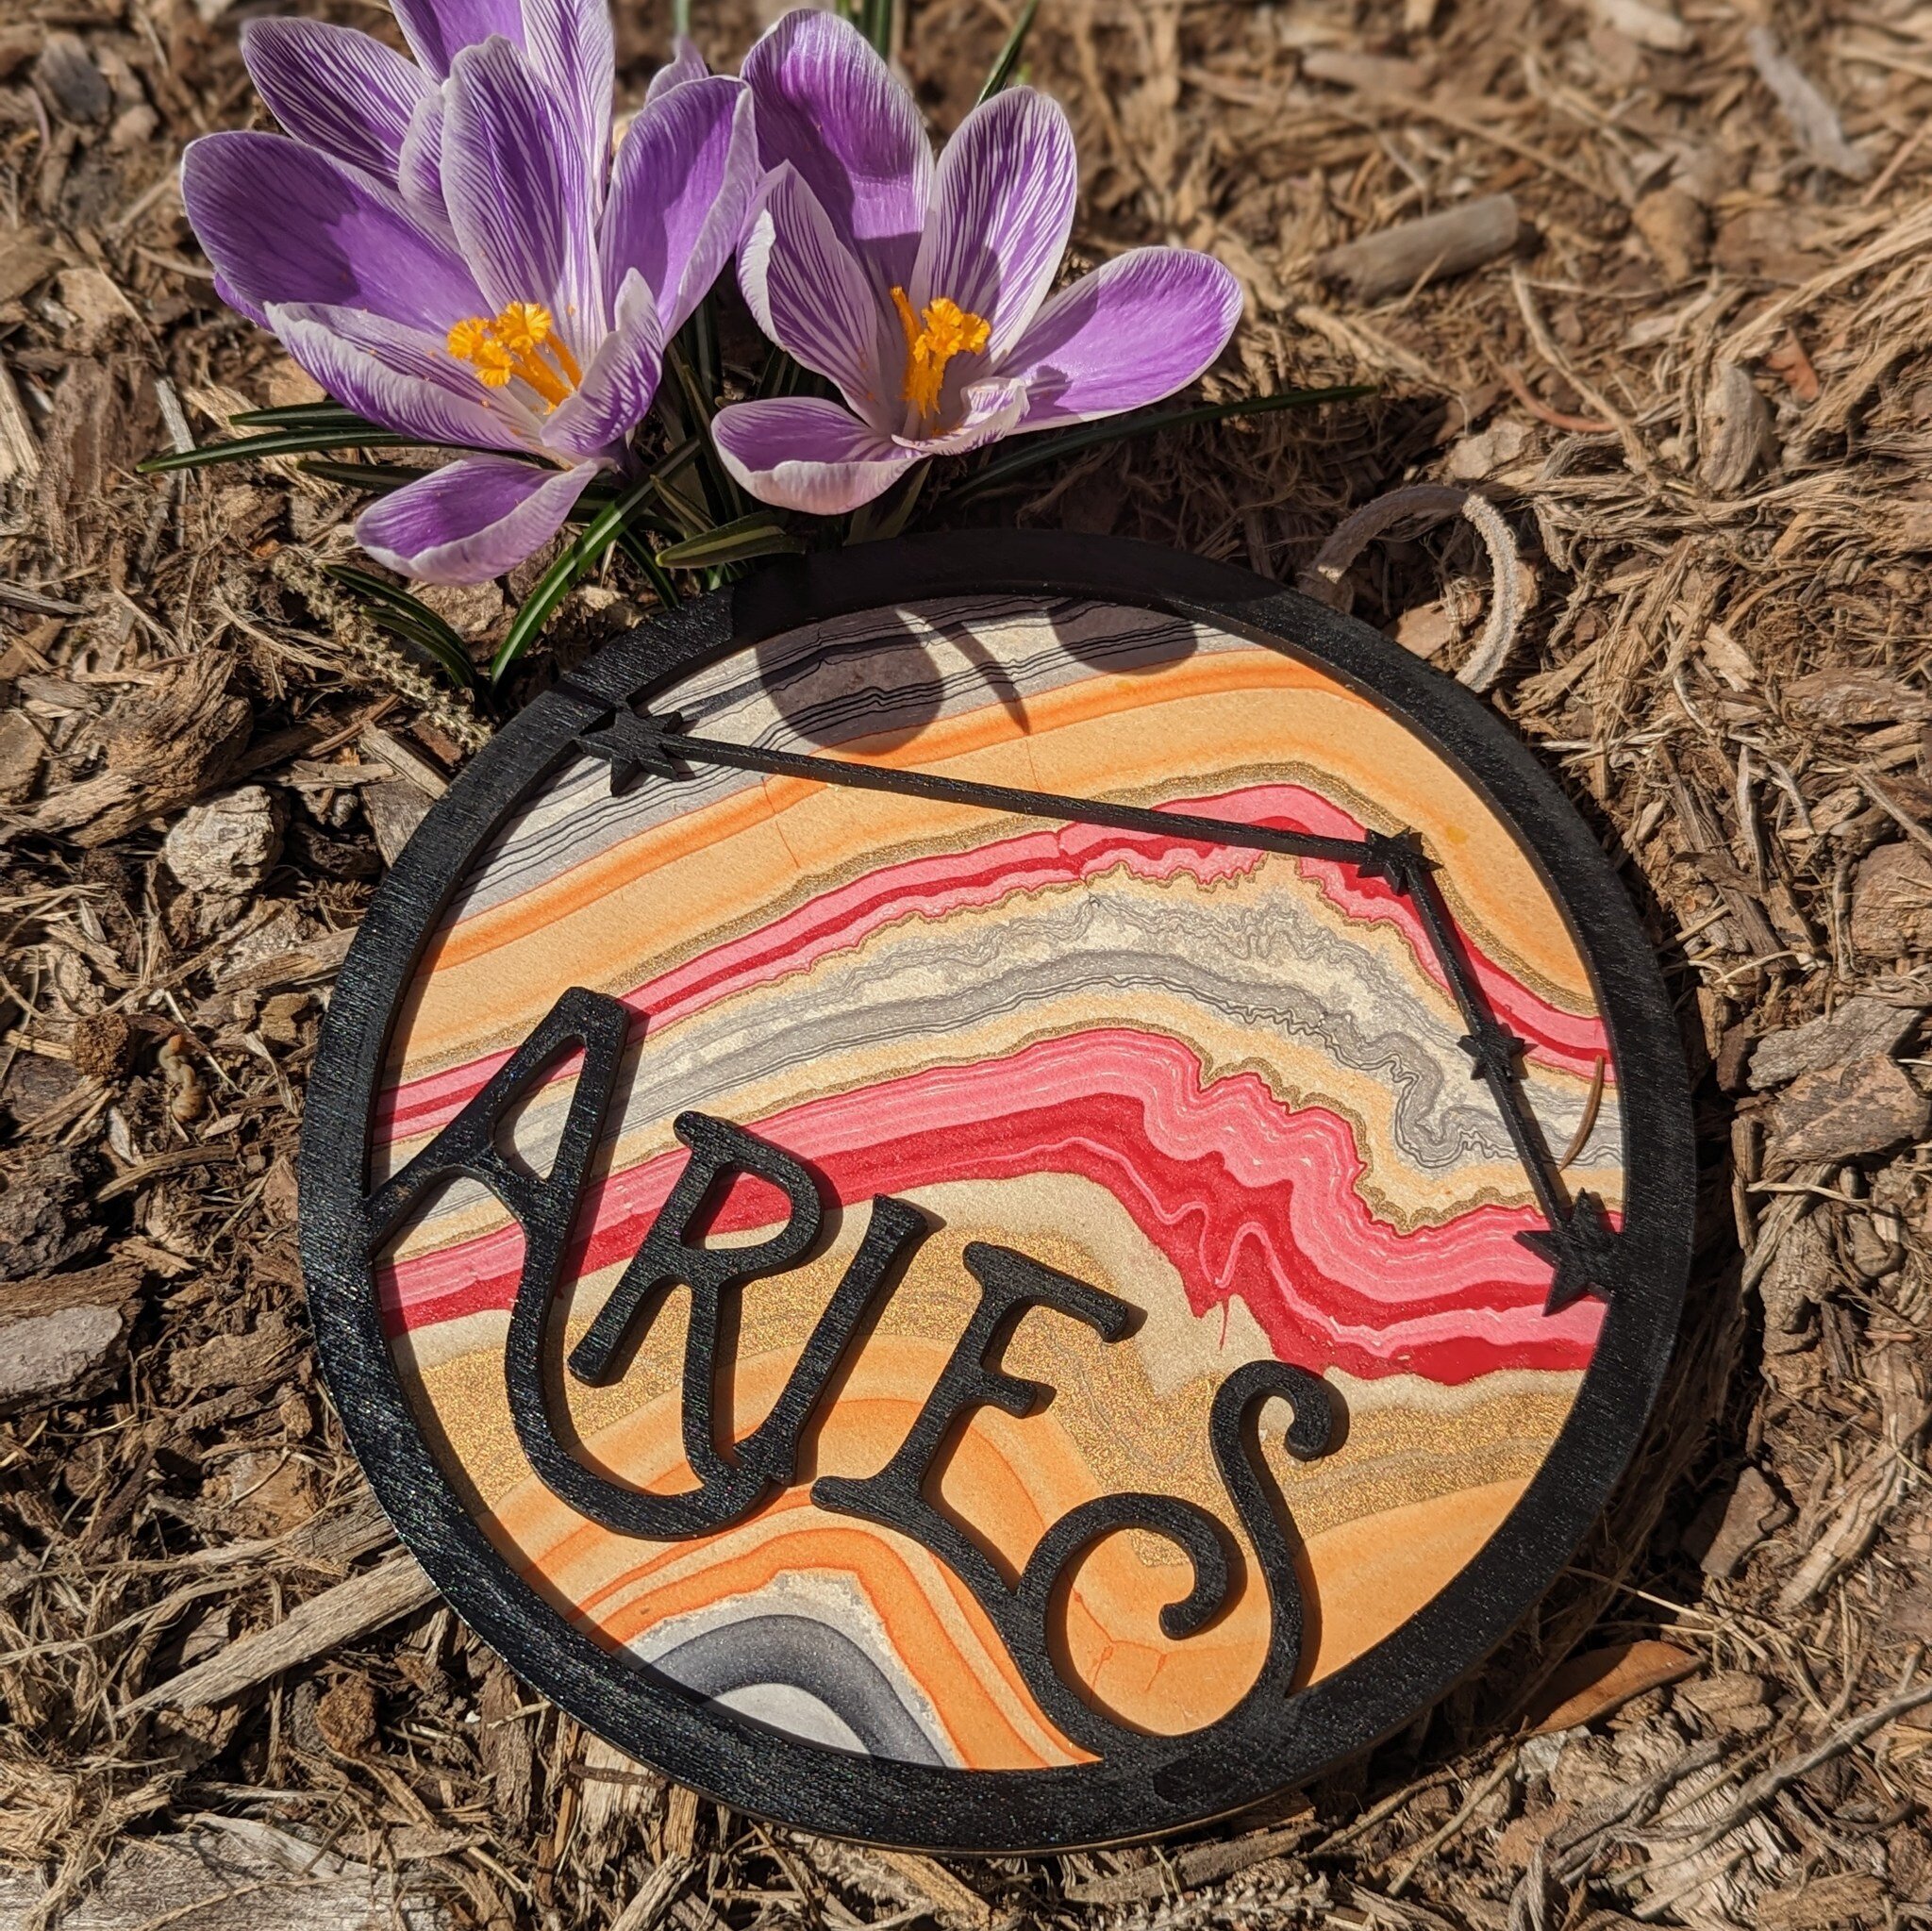 Despite the cold, we're hoping spring will be here to stay soon! We're reminiscing on these blooms from last week to celebrate Aries season ♈

As the first sign of the zodiac, Aries brings a wave of excitement, courage, and new beginnings. We're insp